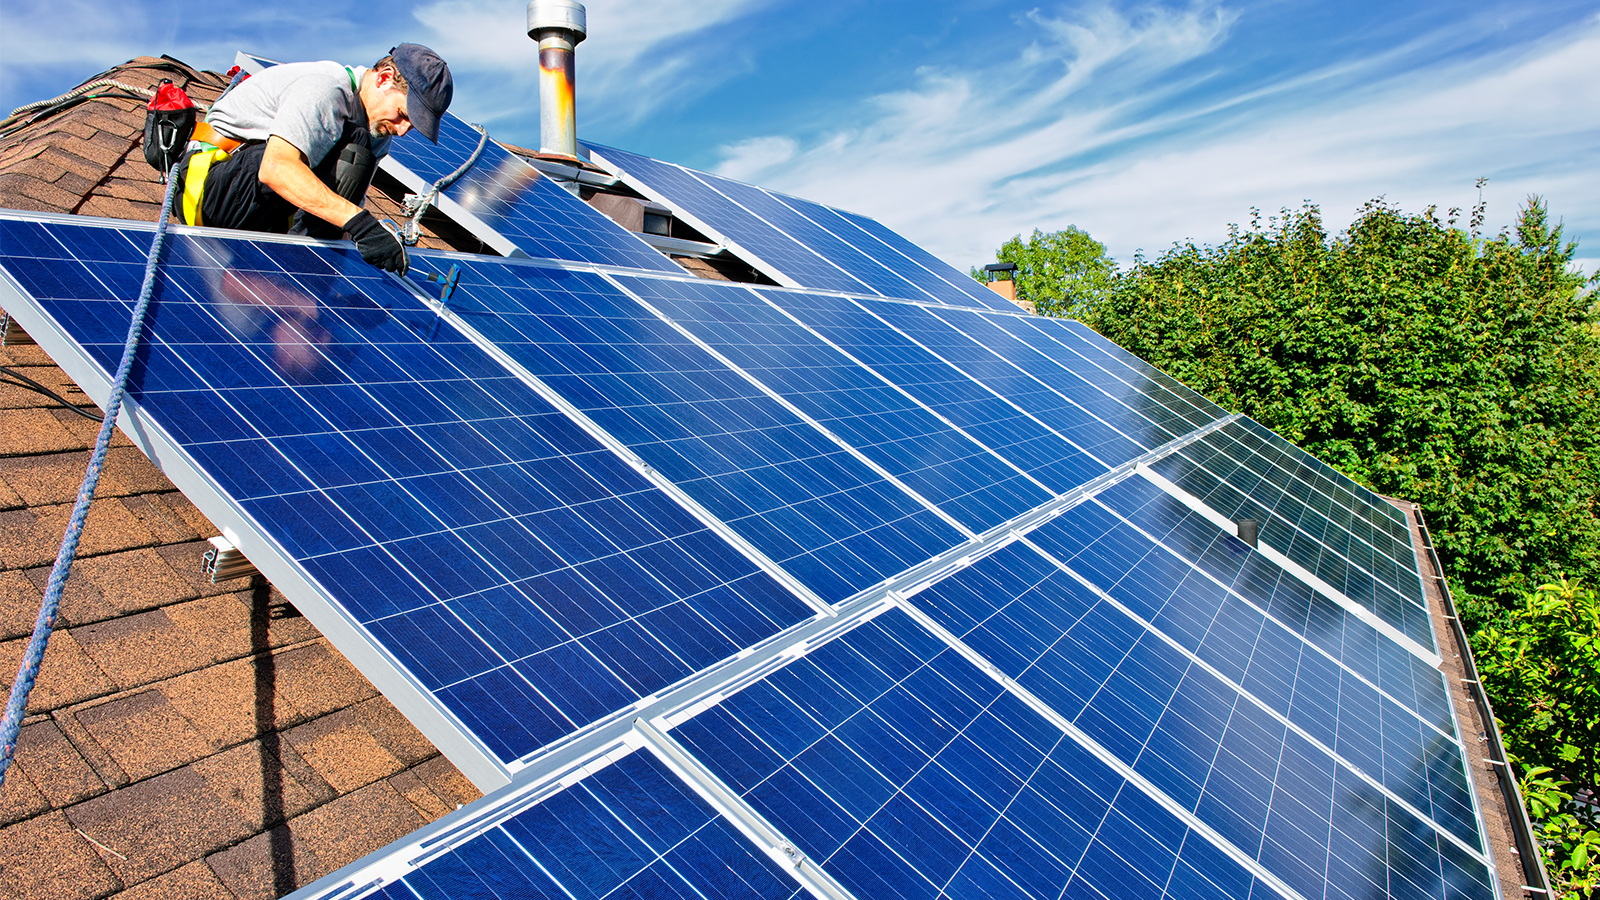 A solar expert installs new solar panels on a home's roof on a sunny day.